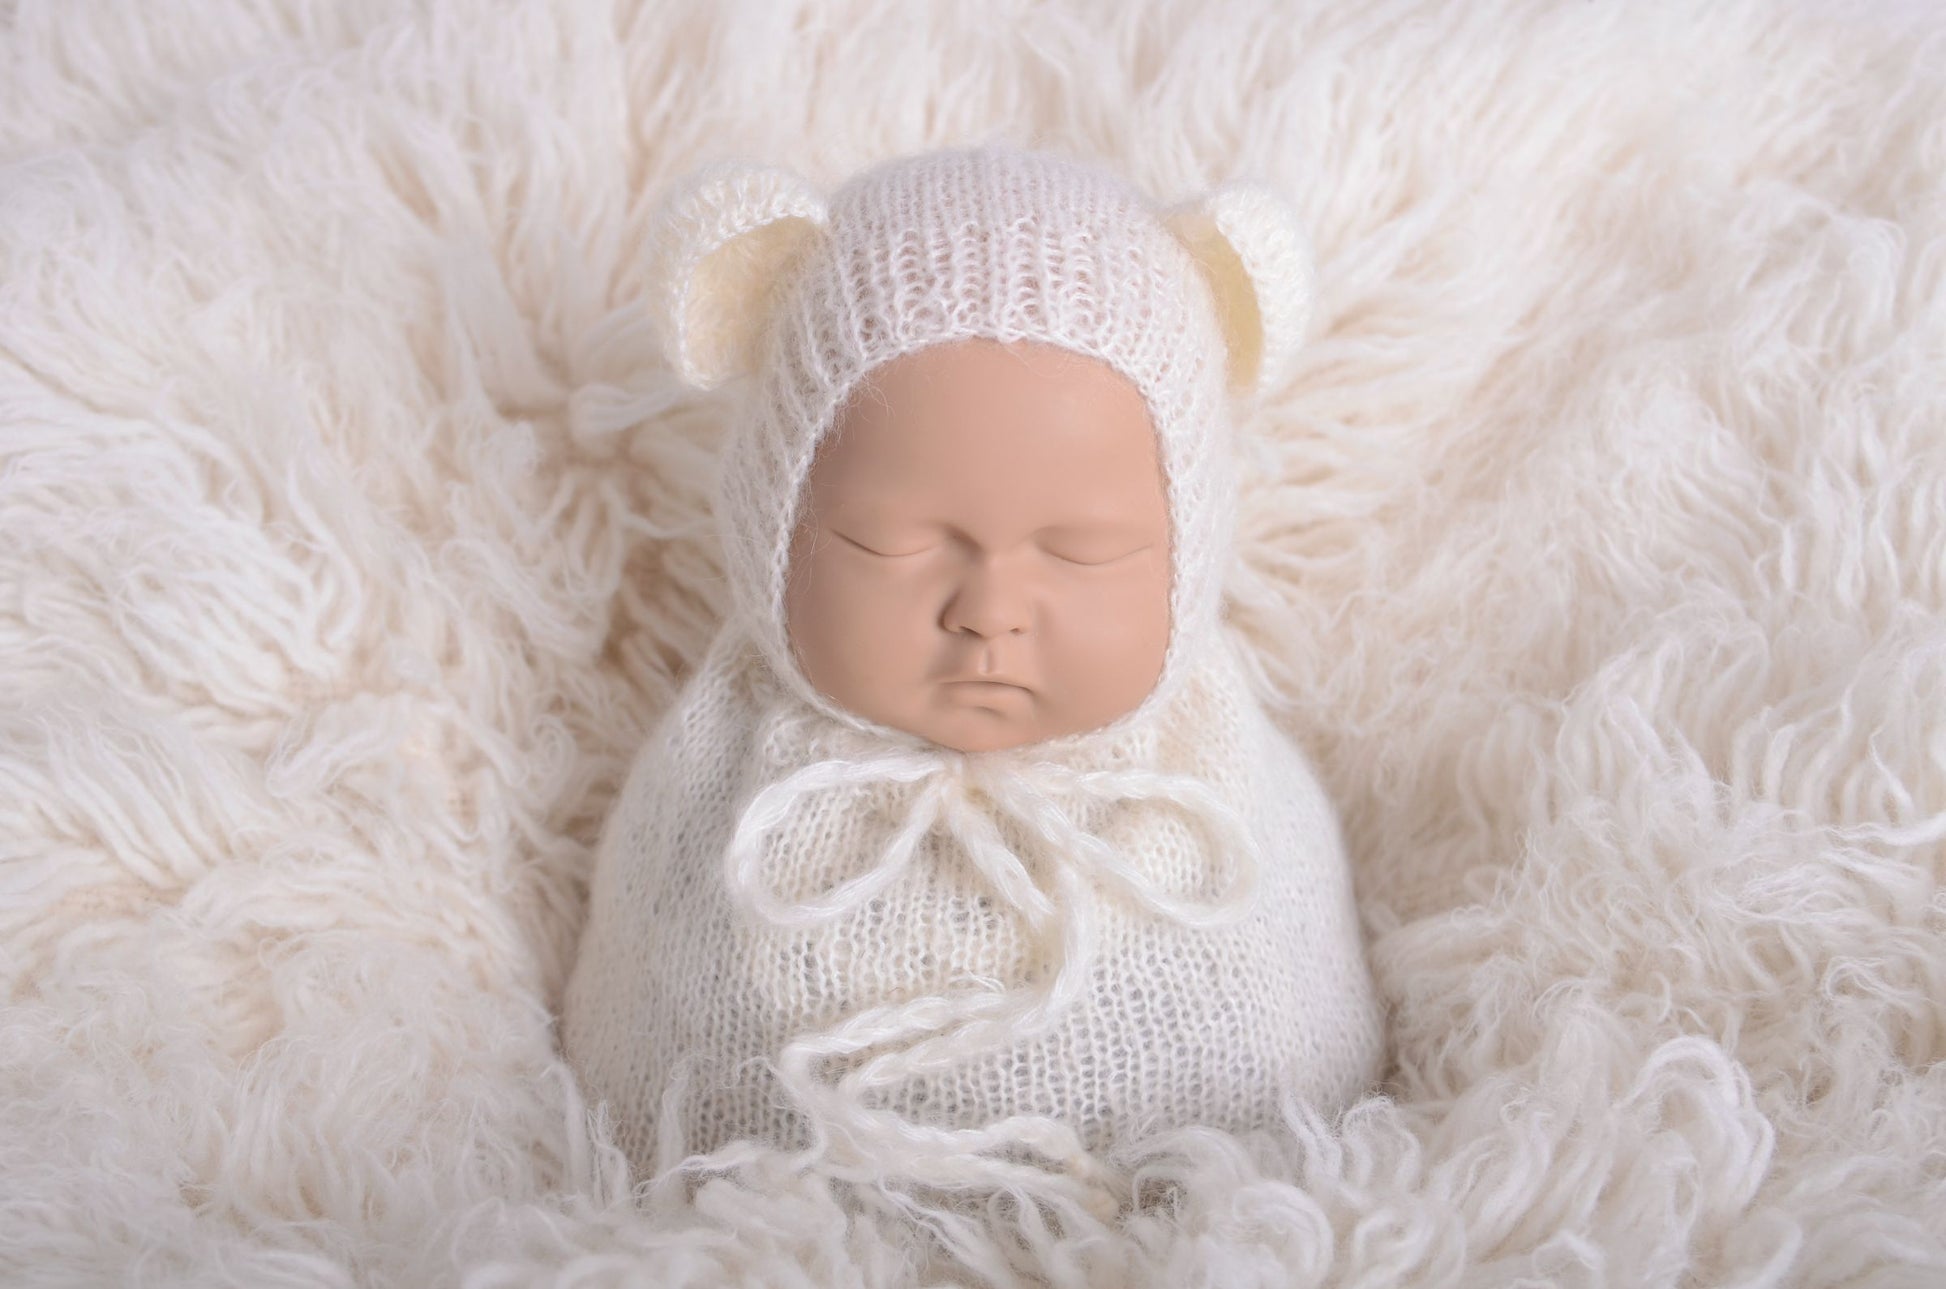 Newborn photography prop featuring a beige mohair bear bonnet and sack on a plush white background, designed for a serene and soft aesthetic.